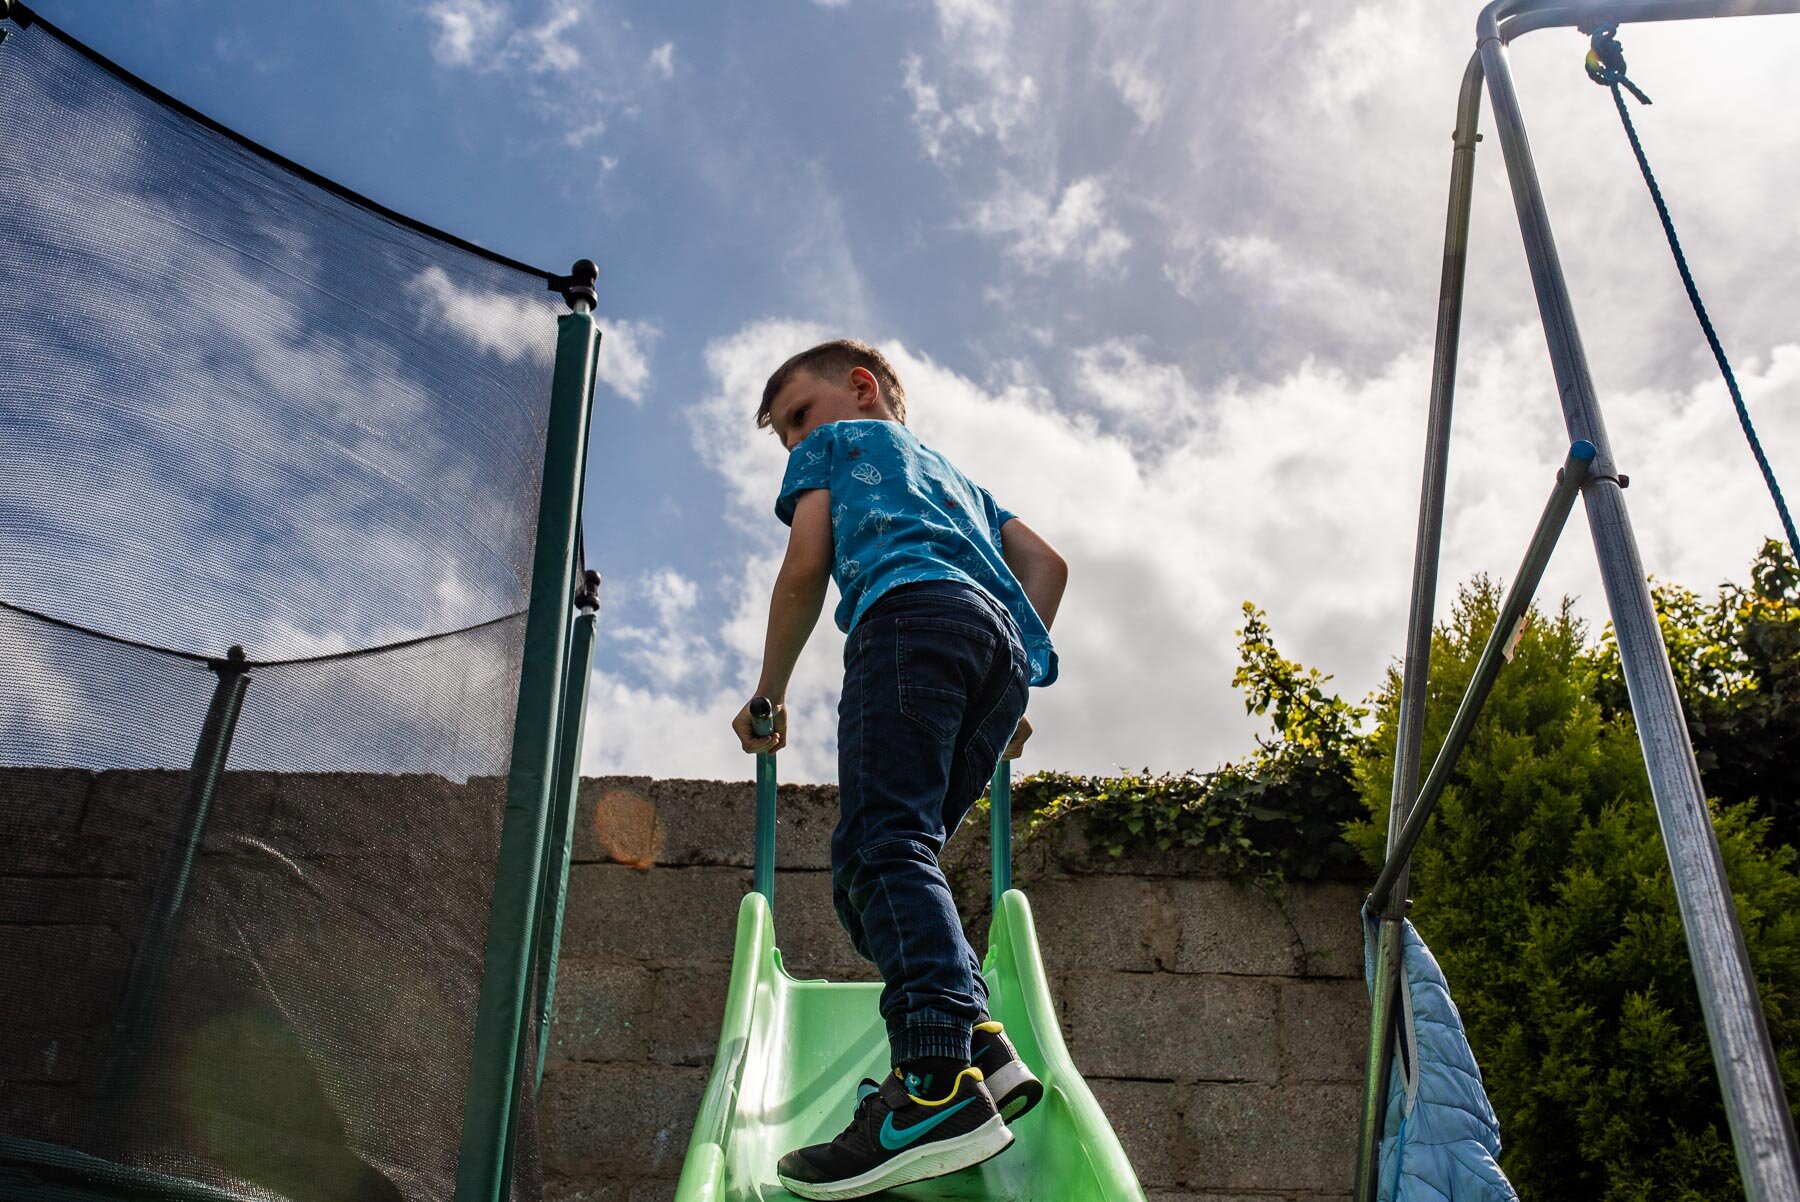 boy standing on green slide next to trampoline and swing